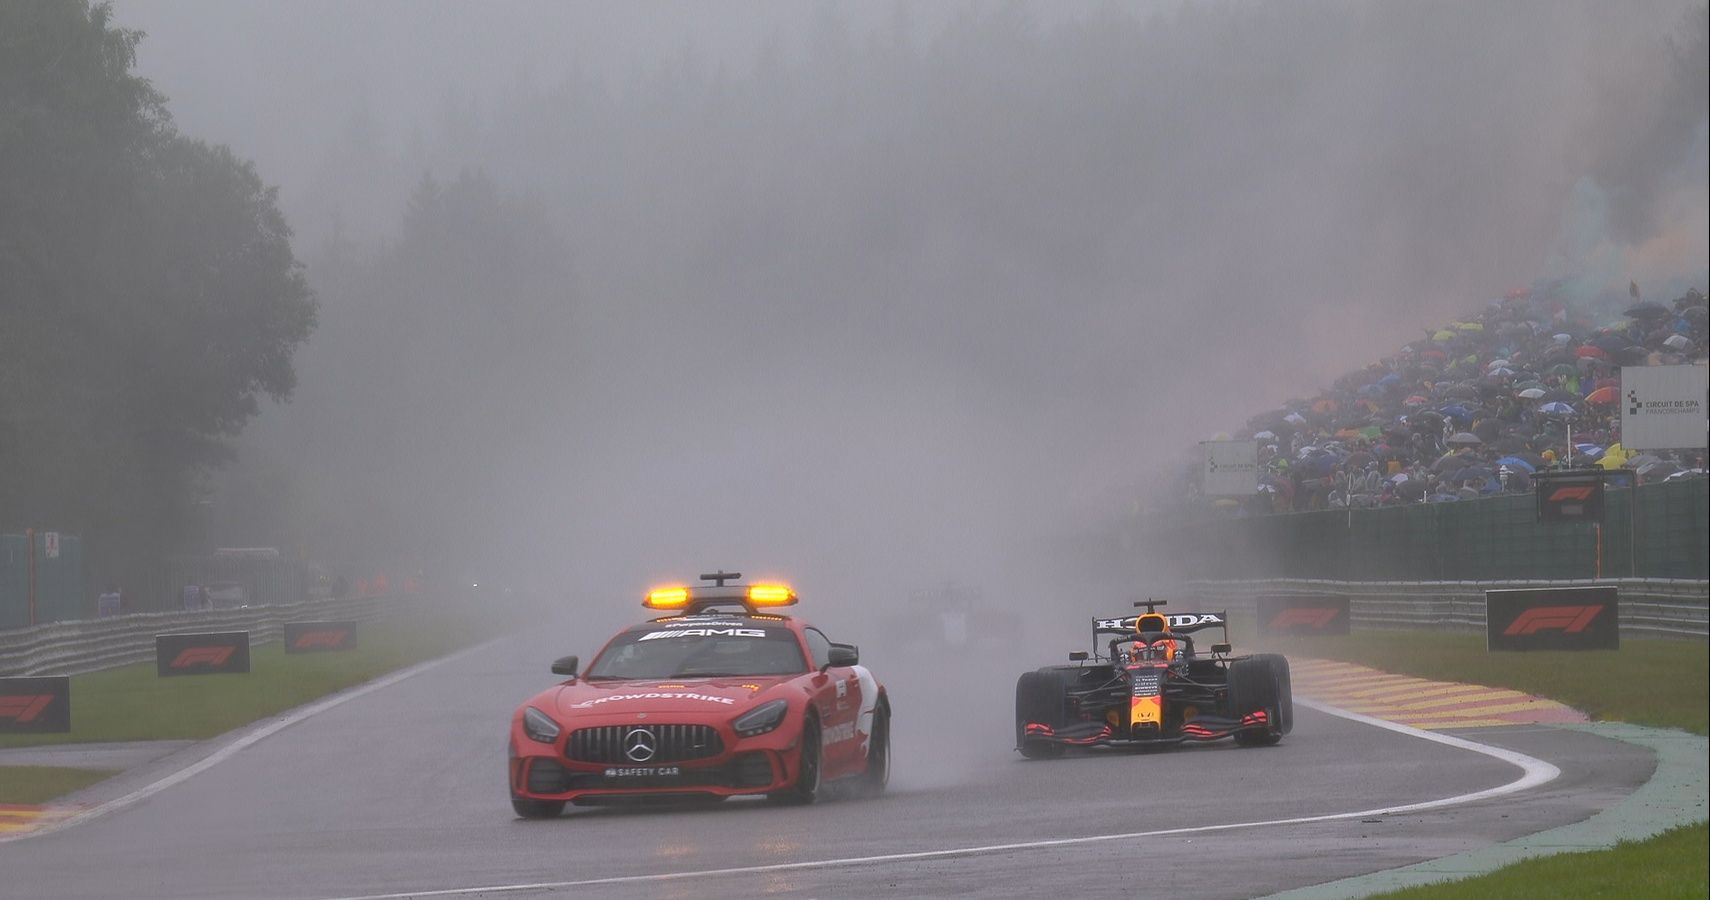 max verstappen behind the safety car at spa-francorchamps